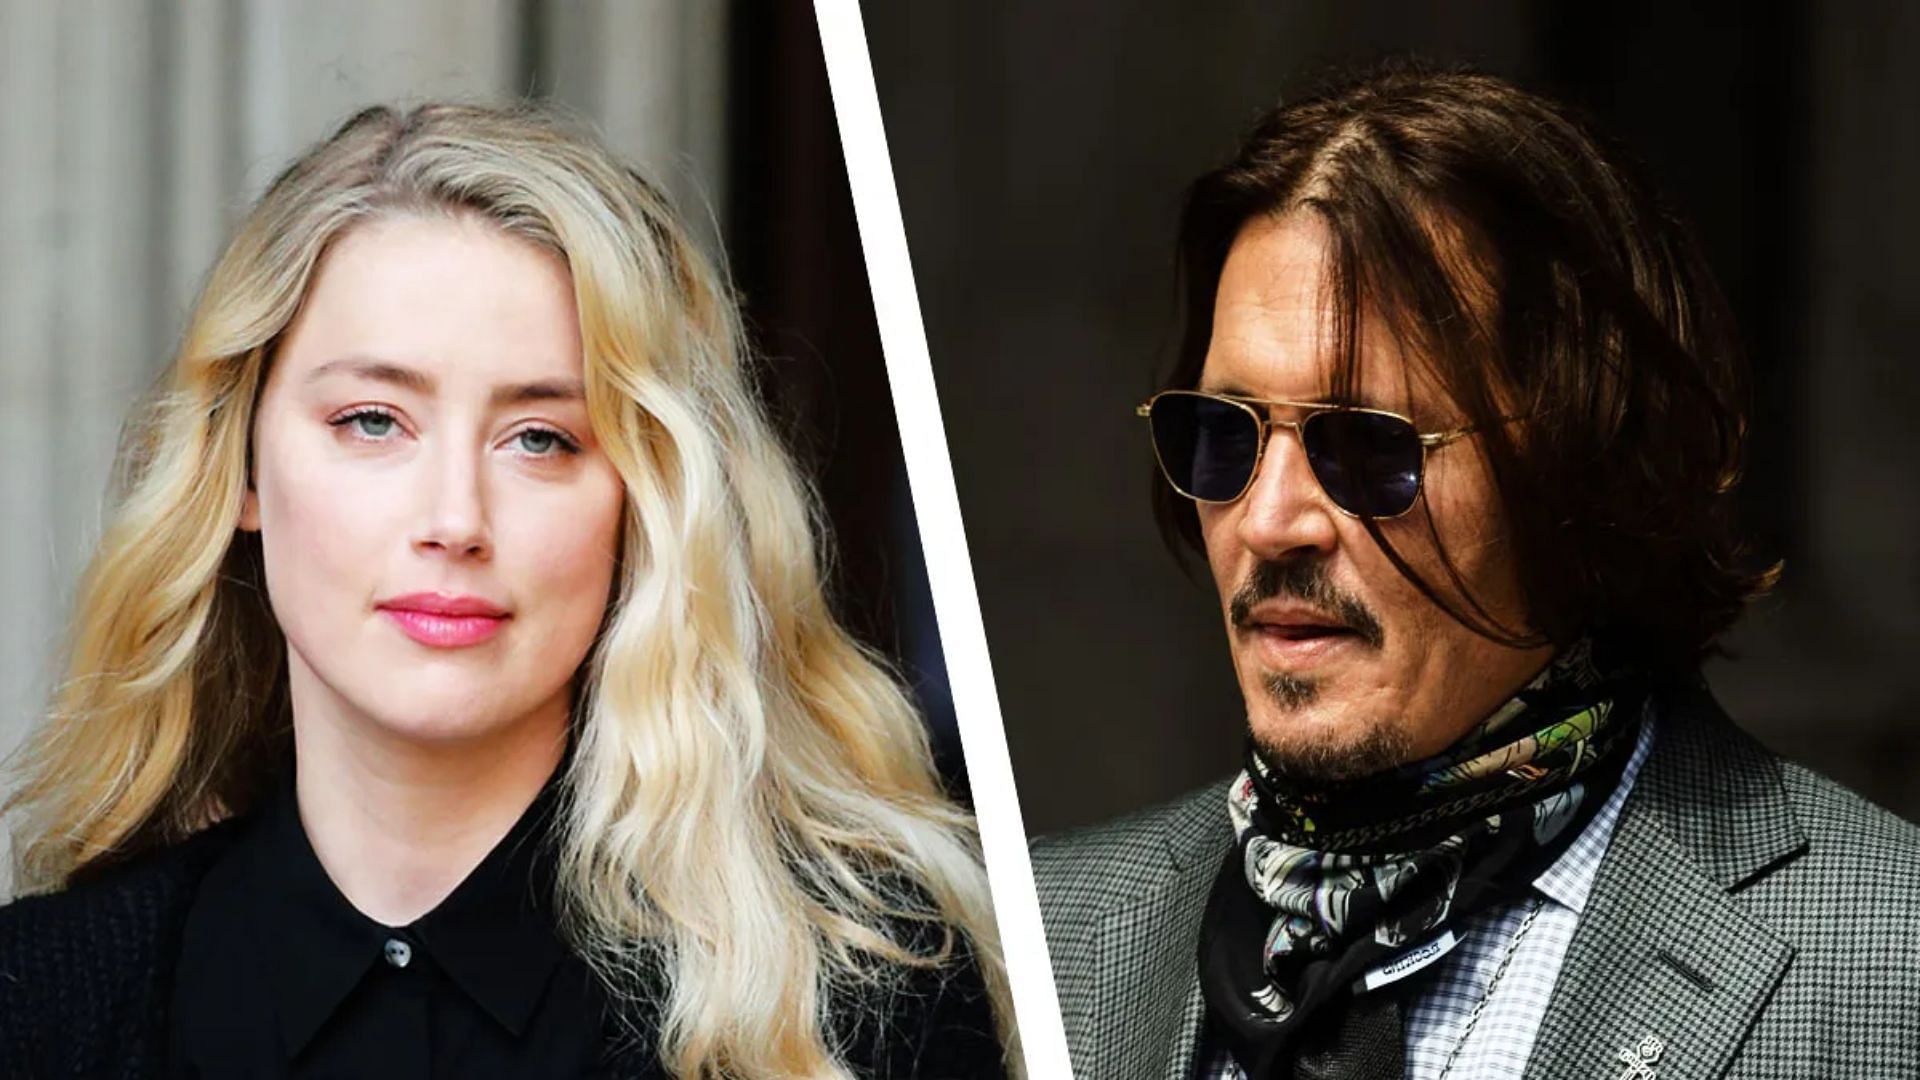 Johnny Depp denies sending alleged texts about Amber Heard ( Image via Getty Images)